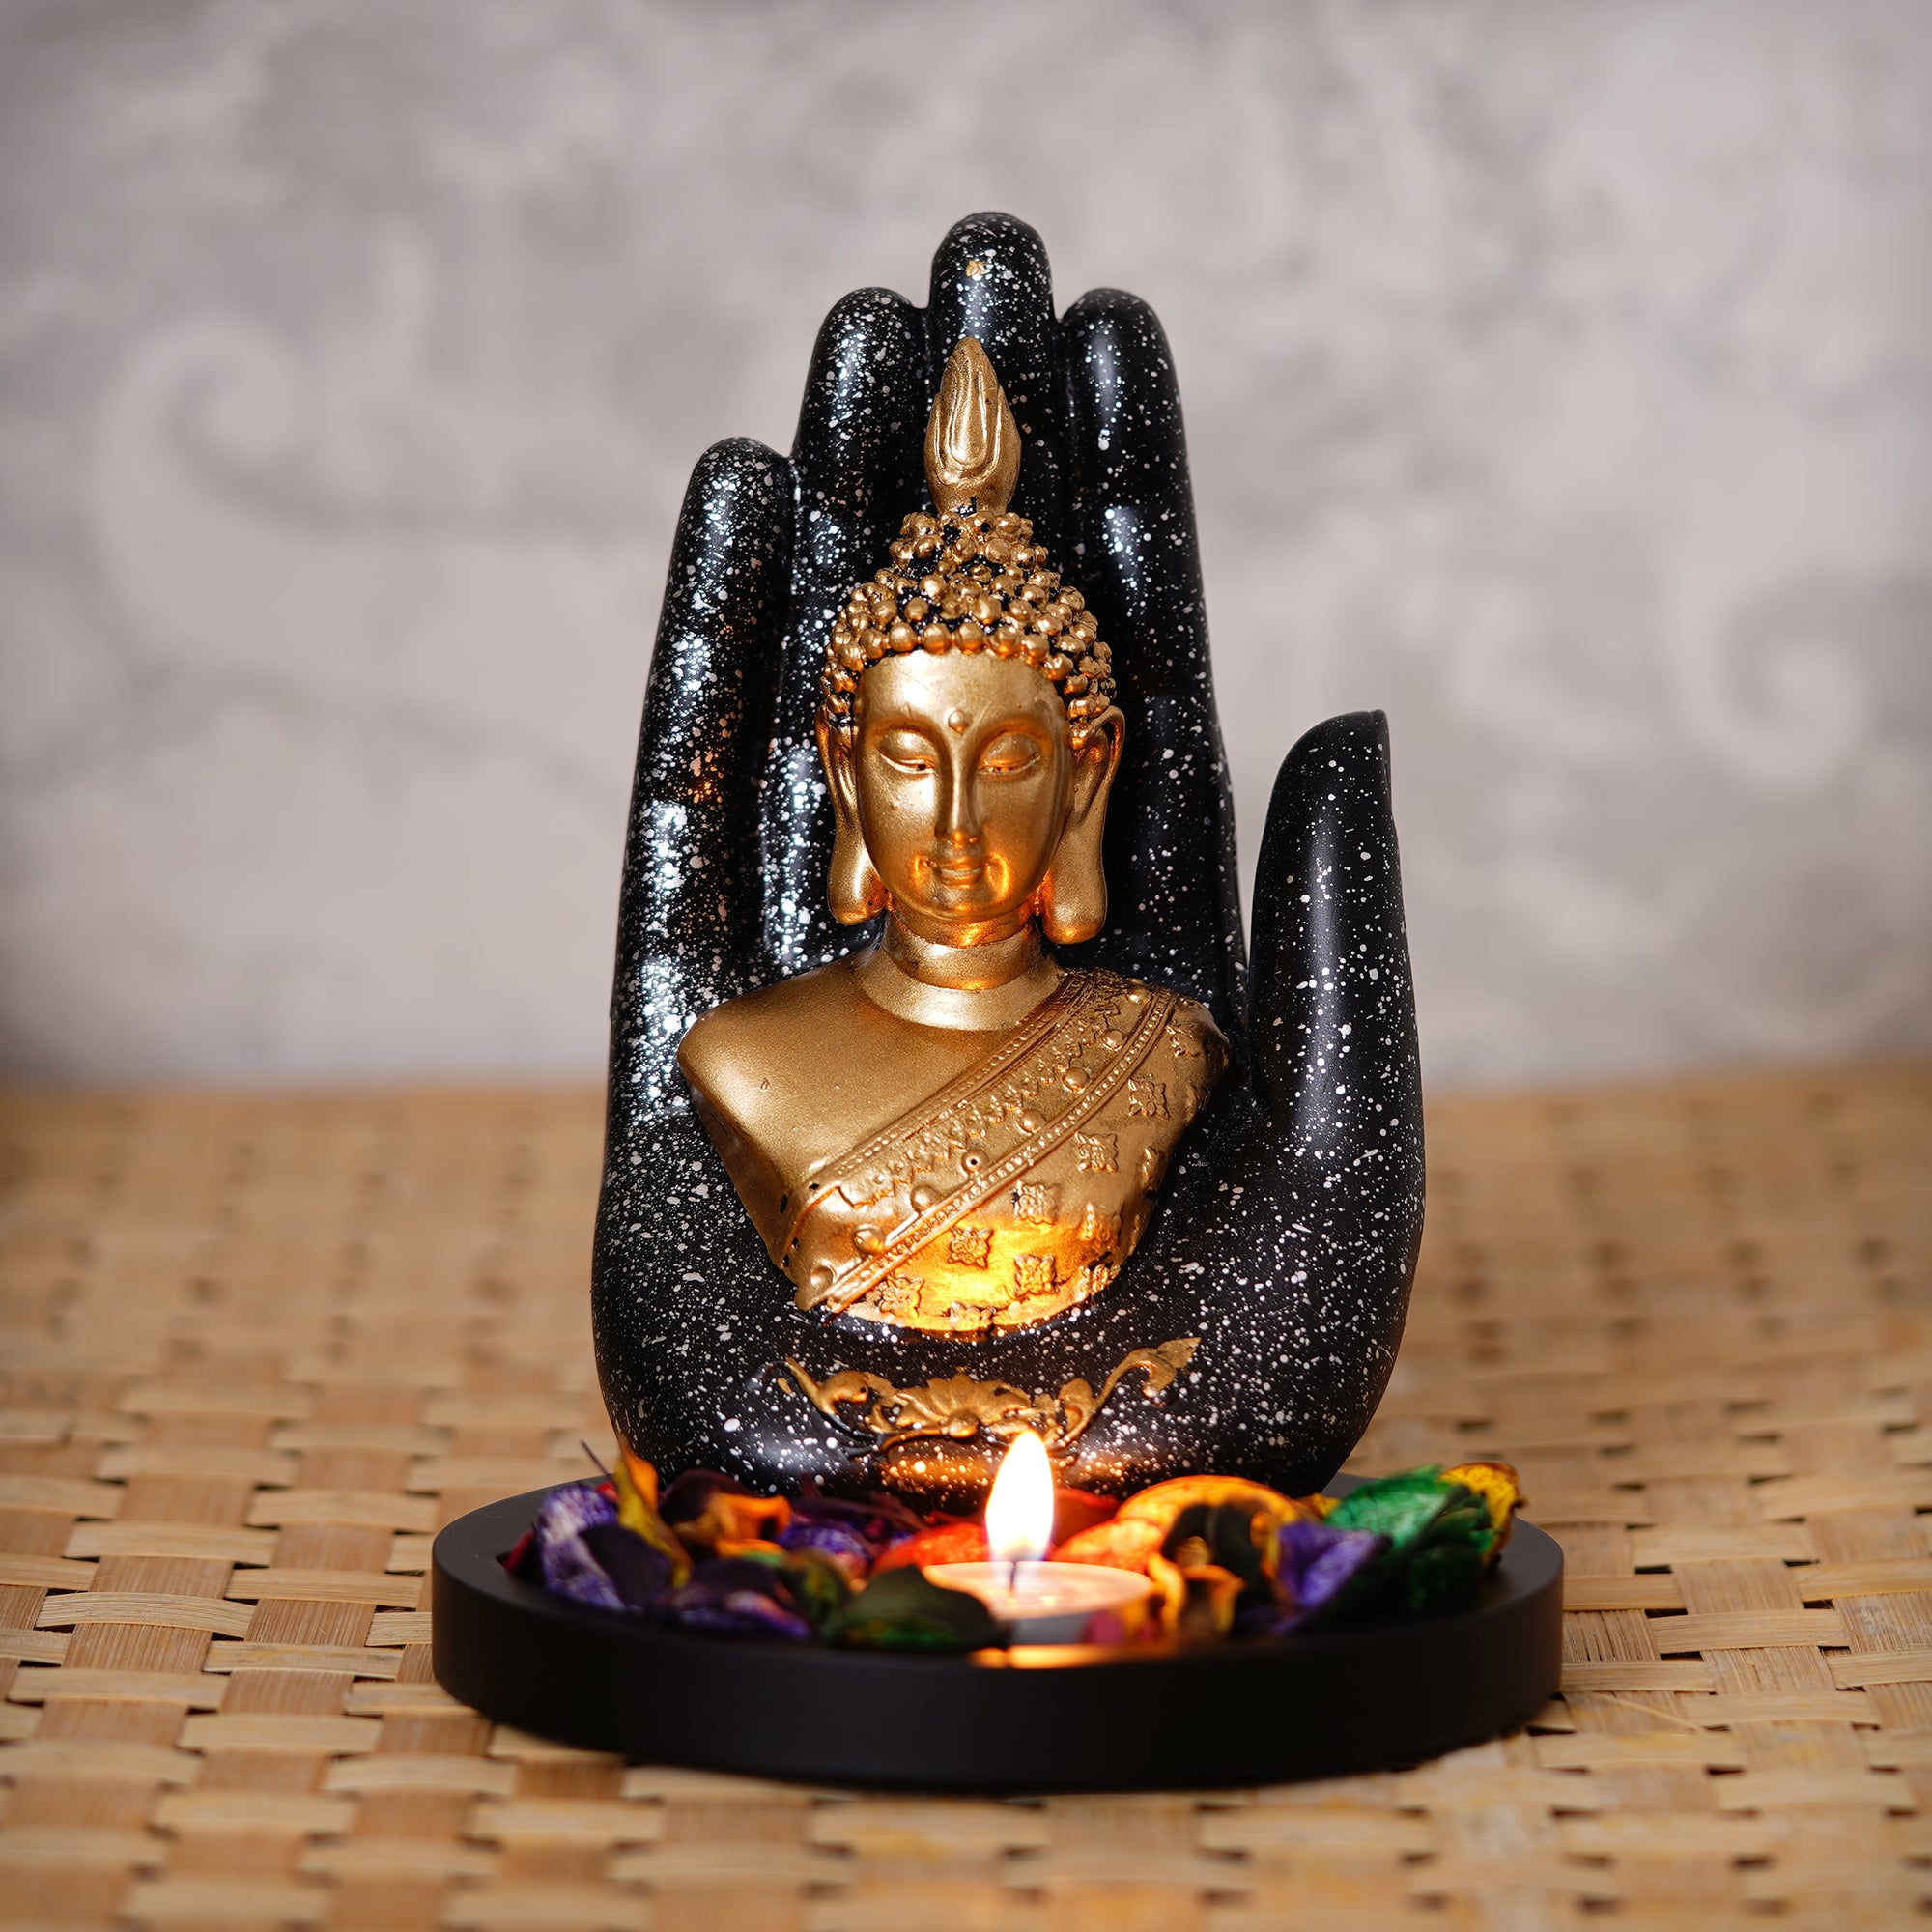 Polyresin Black and Golden Handcrafted Palm Buddha Statue with Wooden Base, Fragranced Petals and Tealight